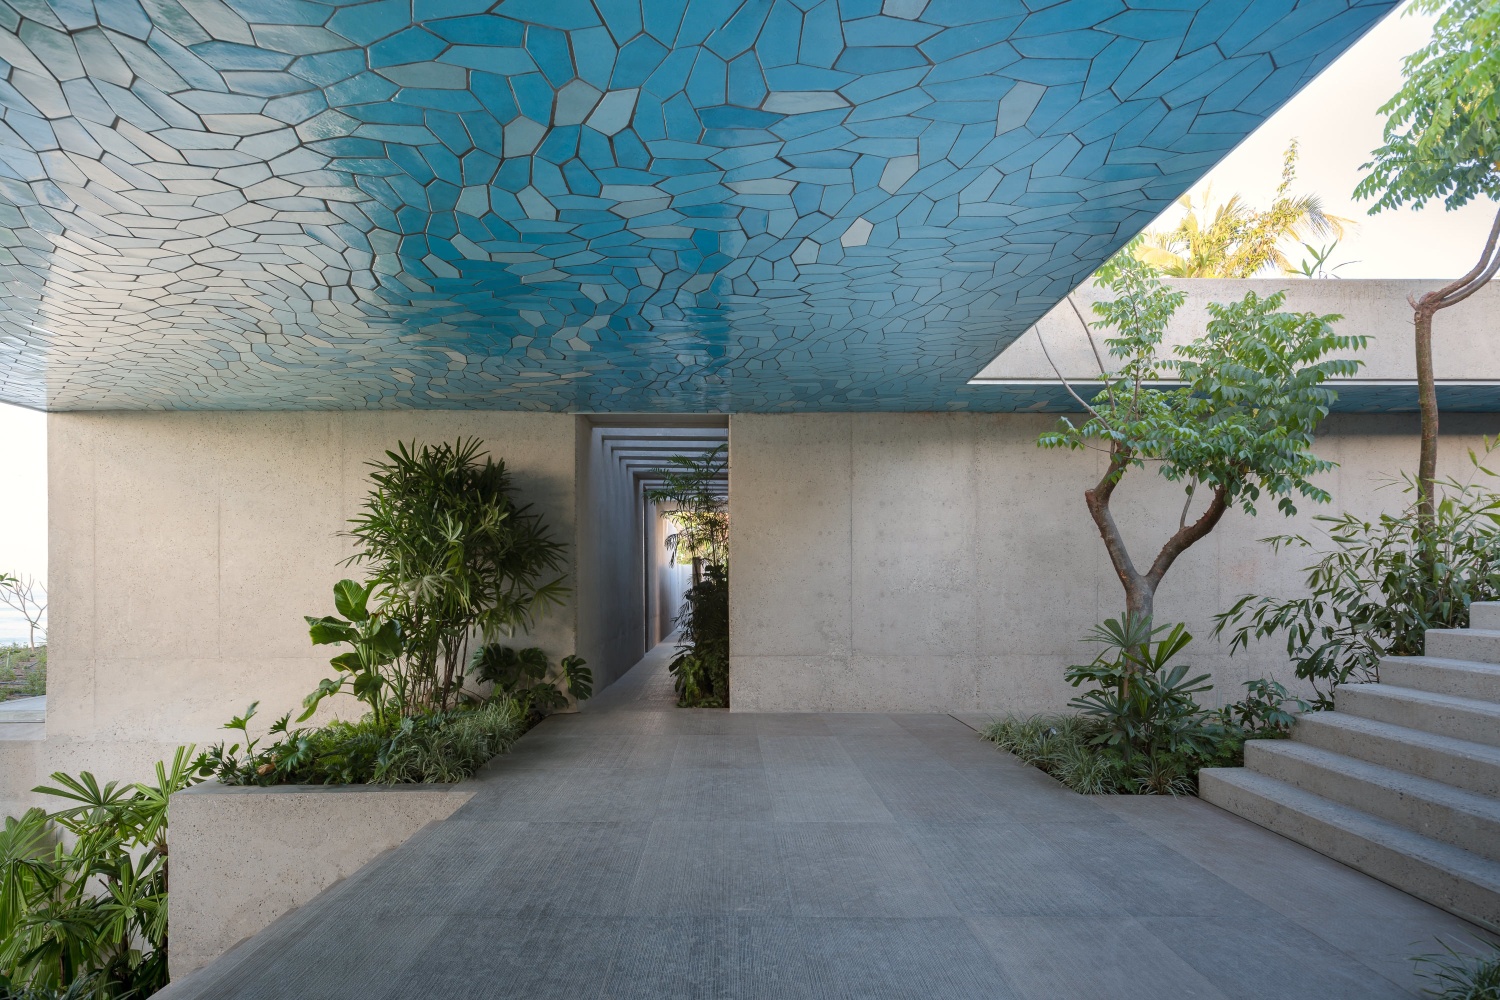 Sarah Crowner
Ceiling (Stretched Pentagons), 2022
Glazed terracotta tiles, plywood, aluminum, mortar, grout
Dimensions variable
Valhalla at Punta Mita, Mexico
Architecture by Tatiana Bilbao Studio
​​​​​​​Photography by Luis Gallardo / LGM Studio Mexico City